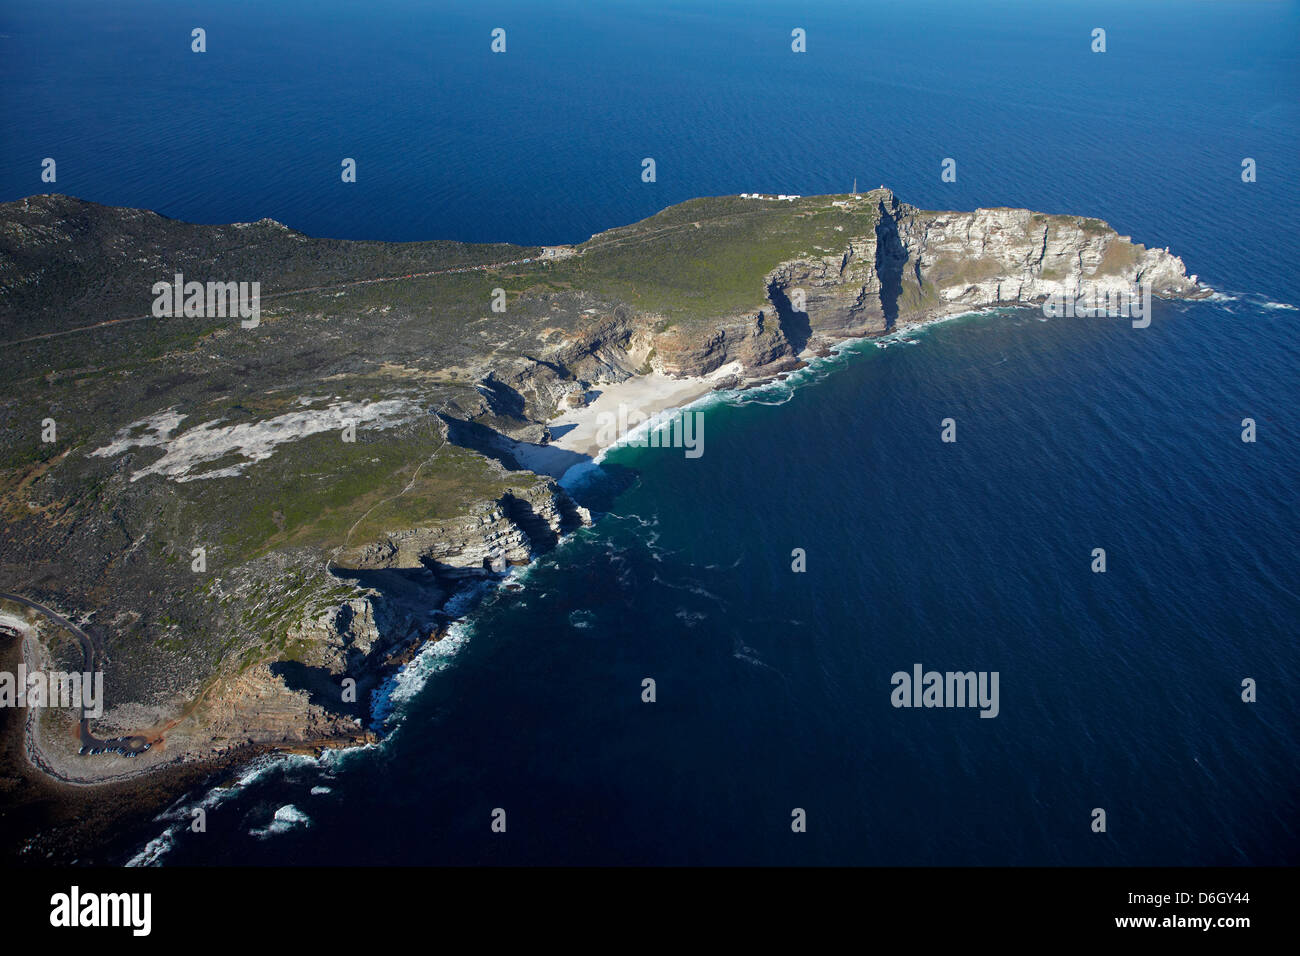 Cape of Good Hope (left) and Cape Point (right), Cape Peninsula, Cape Town, South Africa - aerial Stock Photo